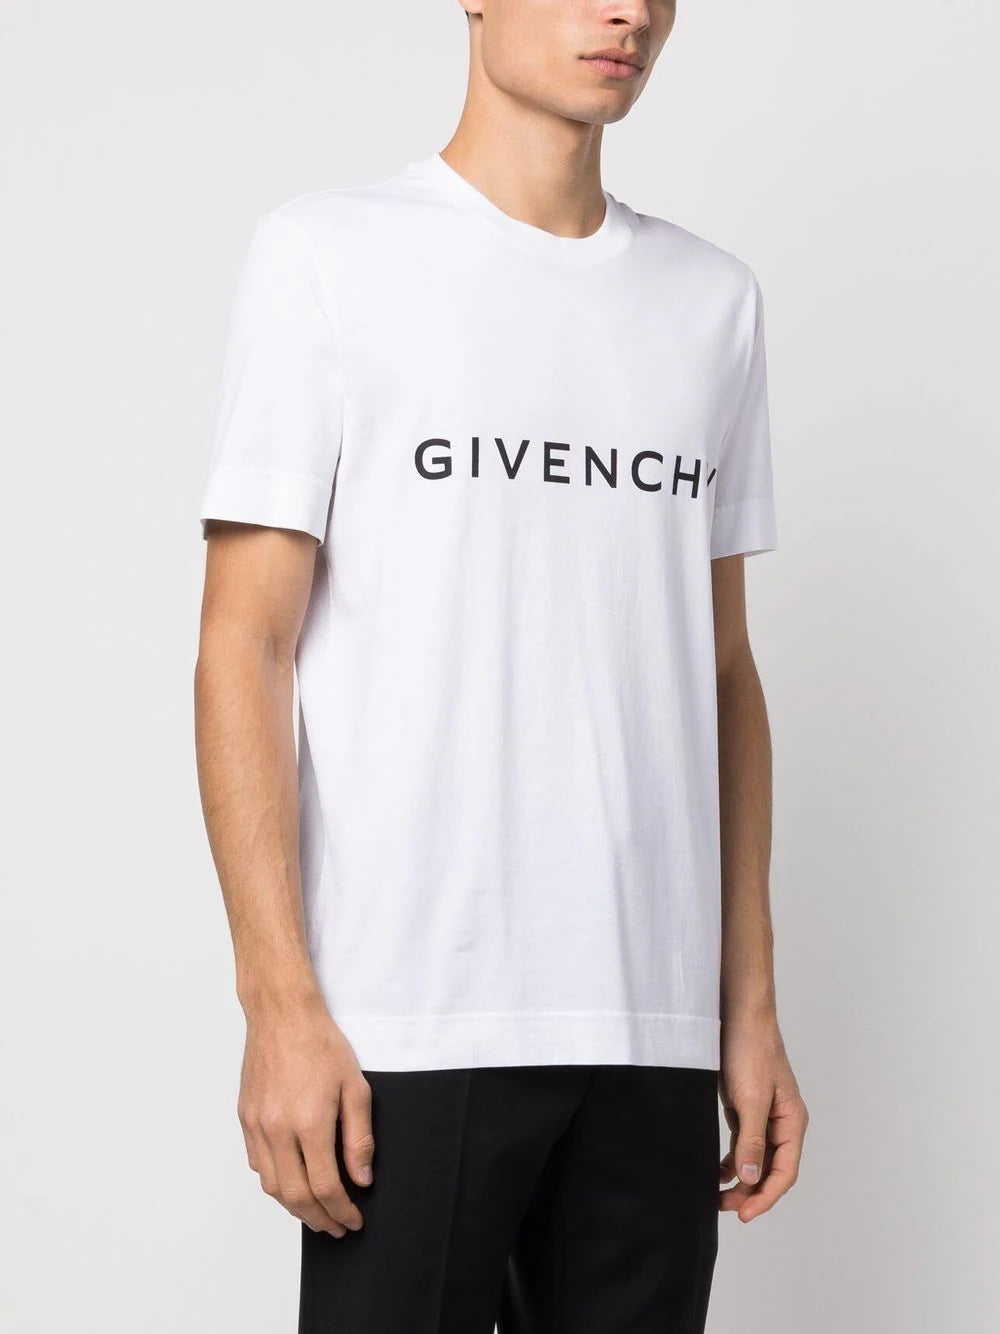 Givenchy Logo Print T-Shirt in White